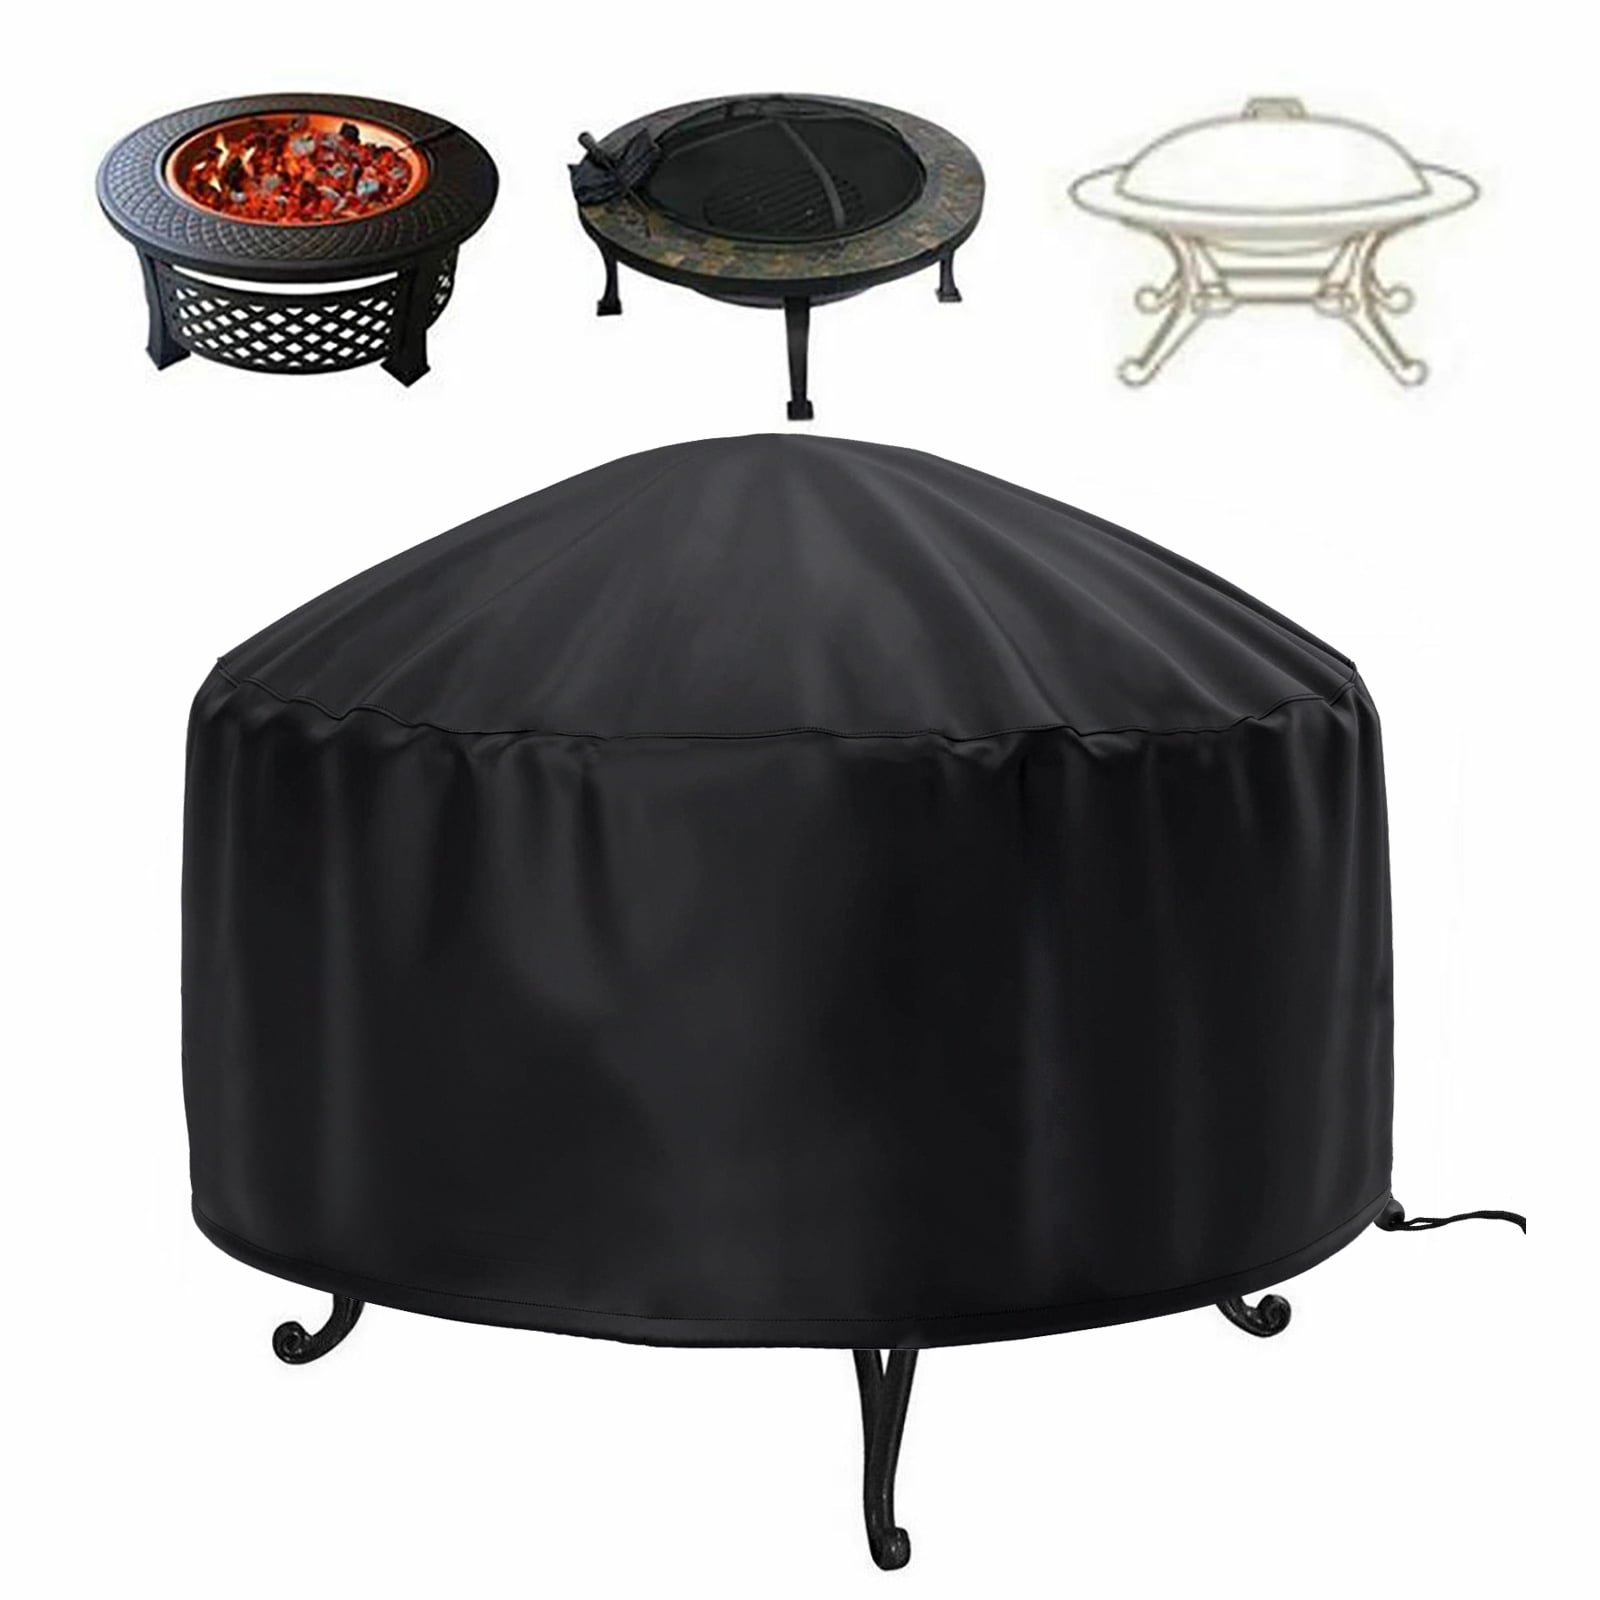 Patio Round Fire Pit Cover Waterproof UV Protector Grill BBQ Cover 30 inch Black 